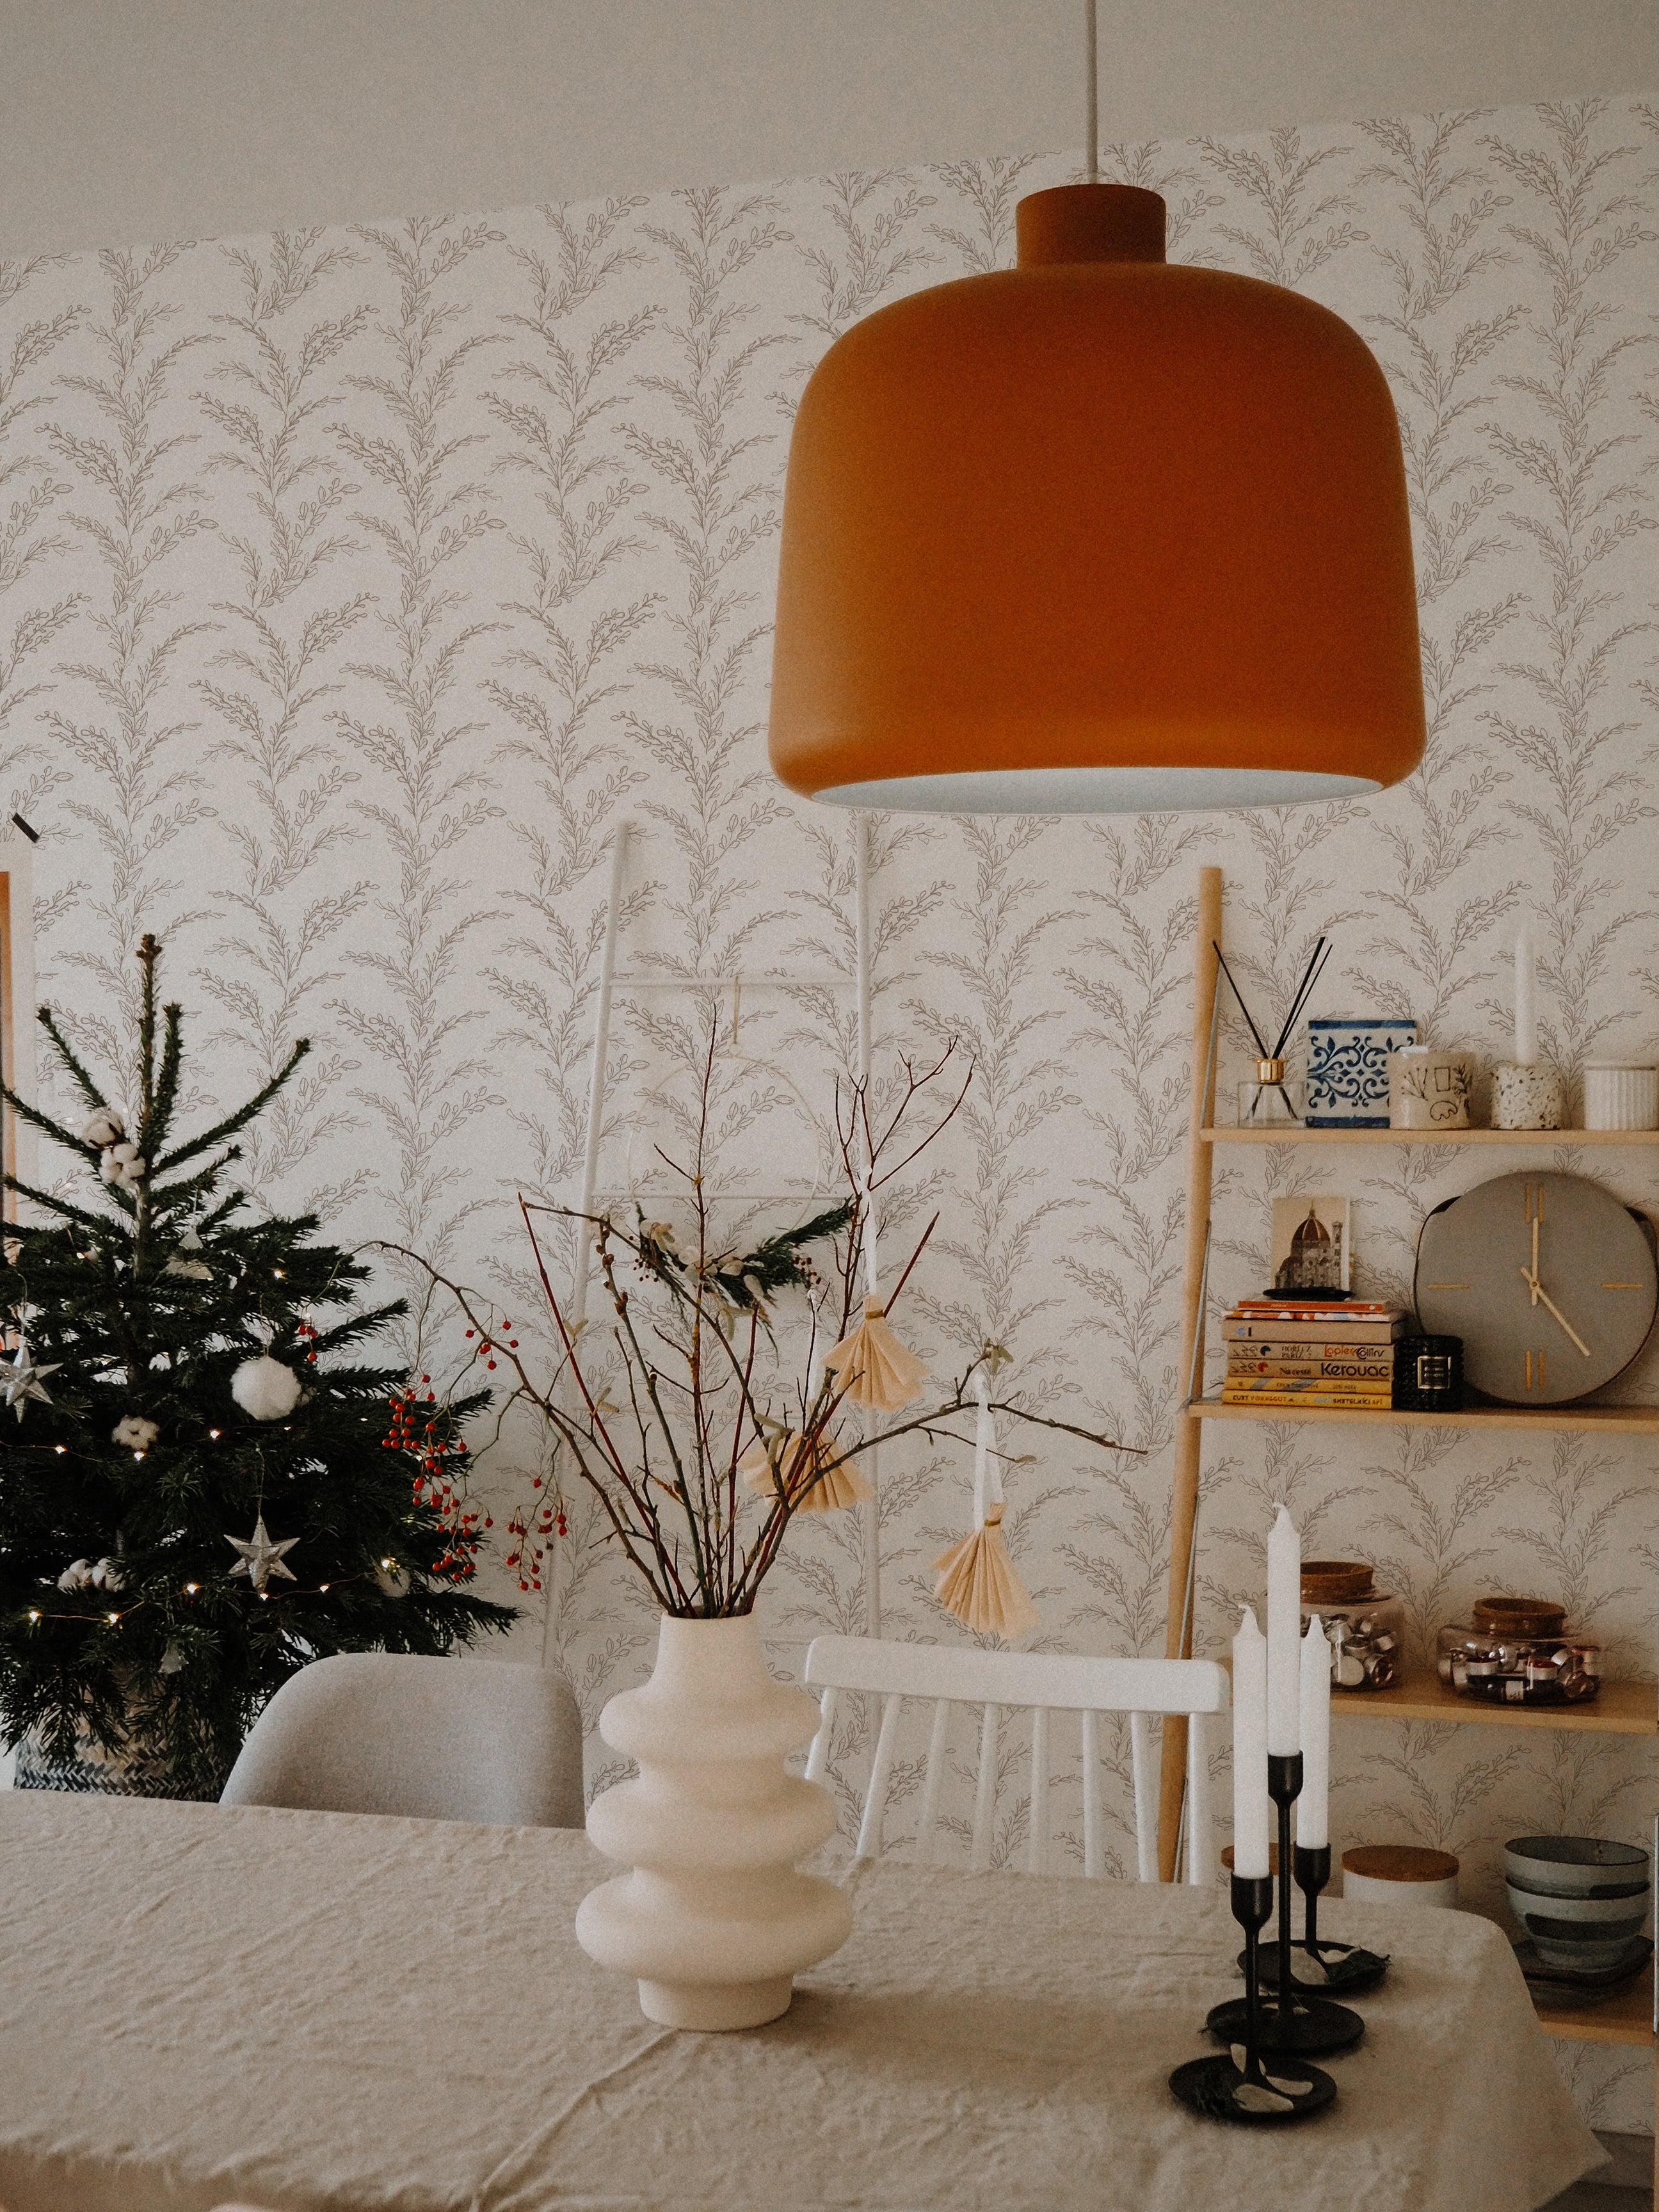 A cozy dining area adorned with the Rustic Foliage Wallpaper in Beige, featuring an intricate botanical print. The space is warmly lit by an oversized orange pendant lamp above a white table with modern gray and white chairs. The corner includes a tastefully decorated Christmas tree and a striking white sculptural vase with bare branches.